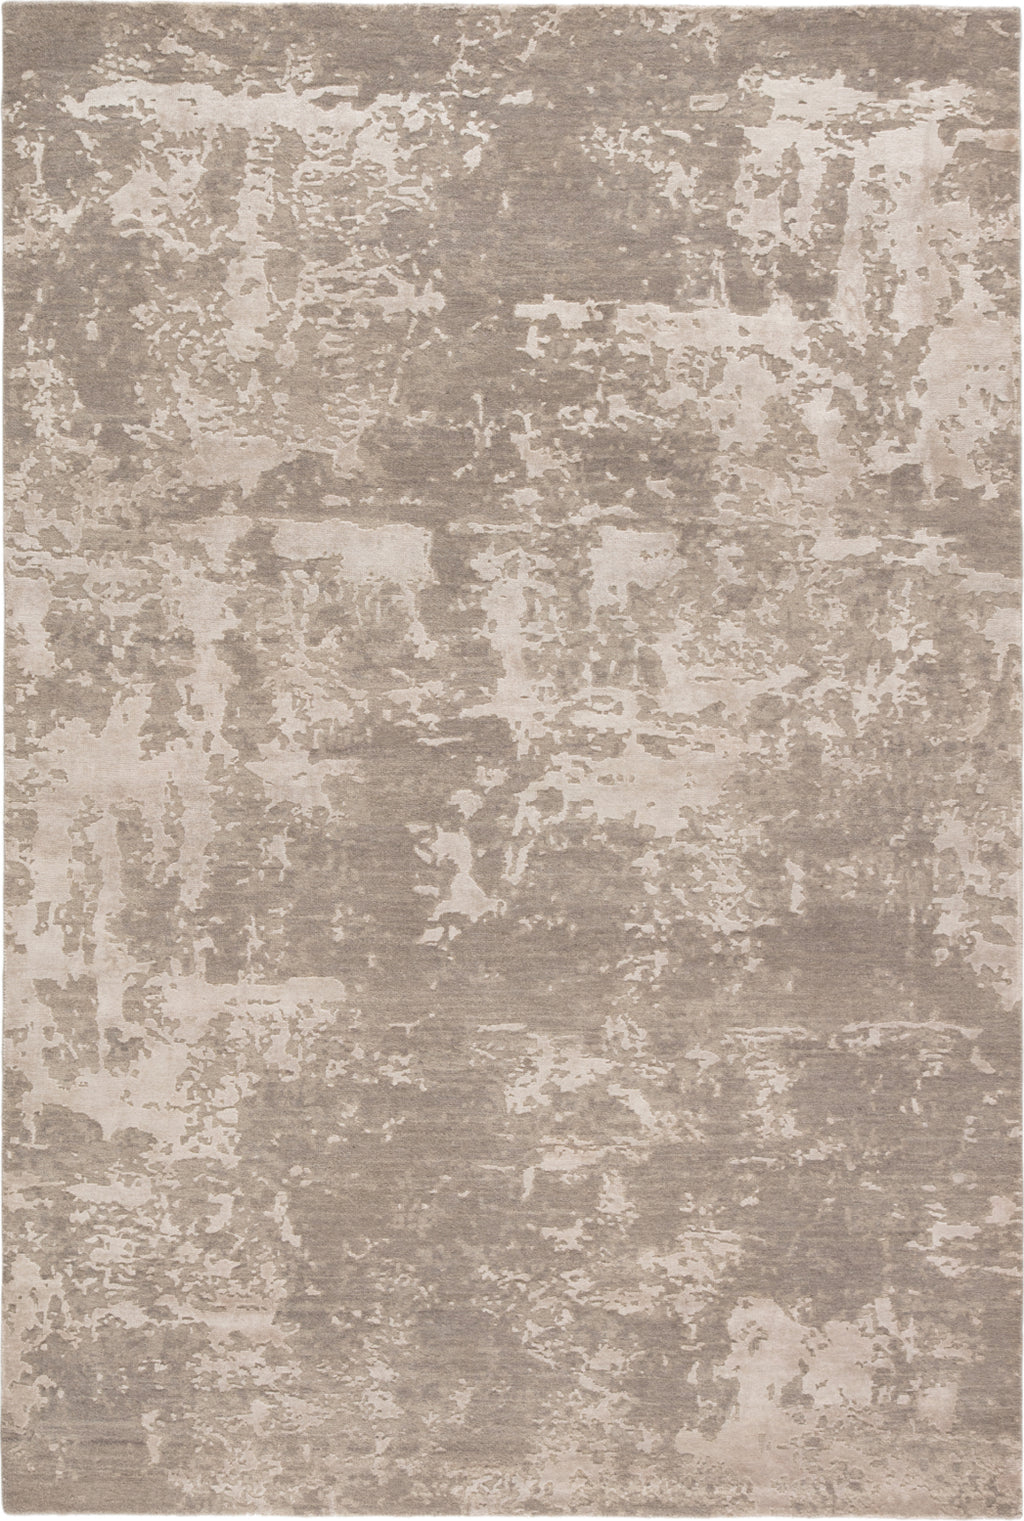 Jaipur Living Project Theory Paratem PRE09 Gray/Cream Area Rug by Kavi - Top Down